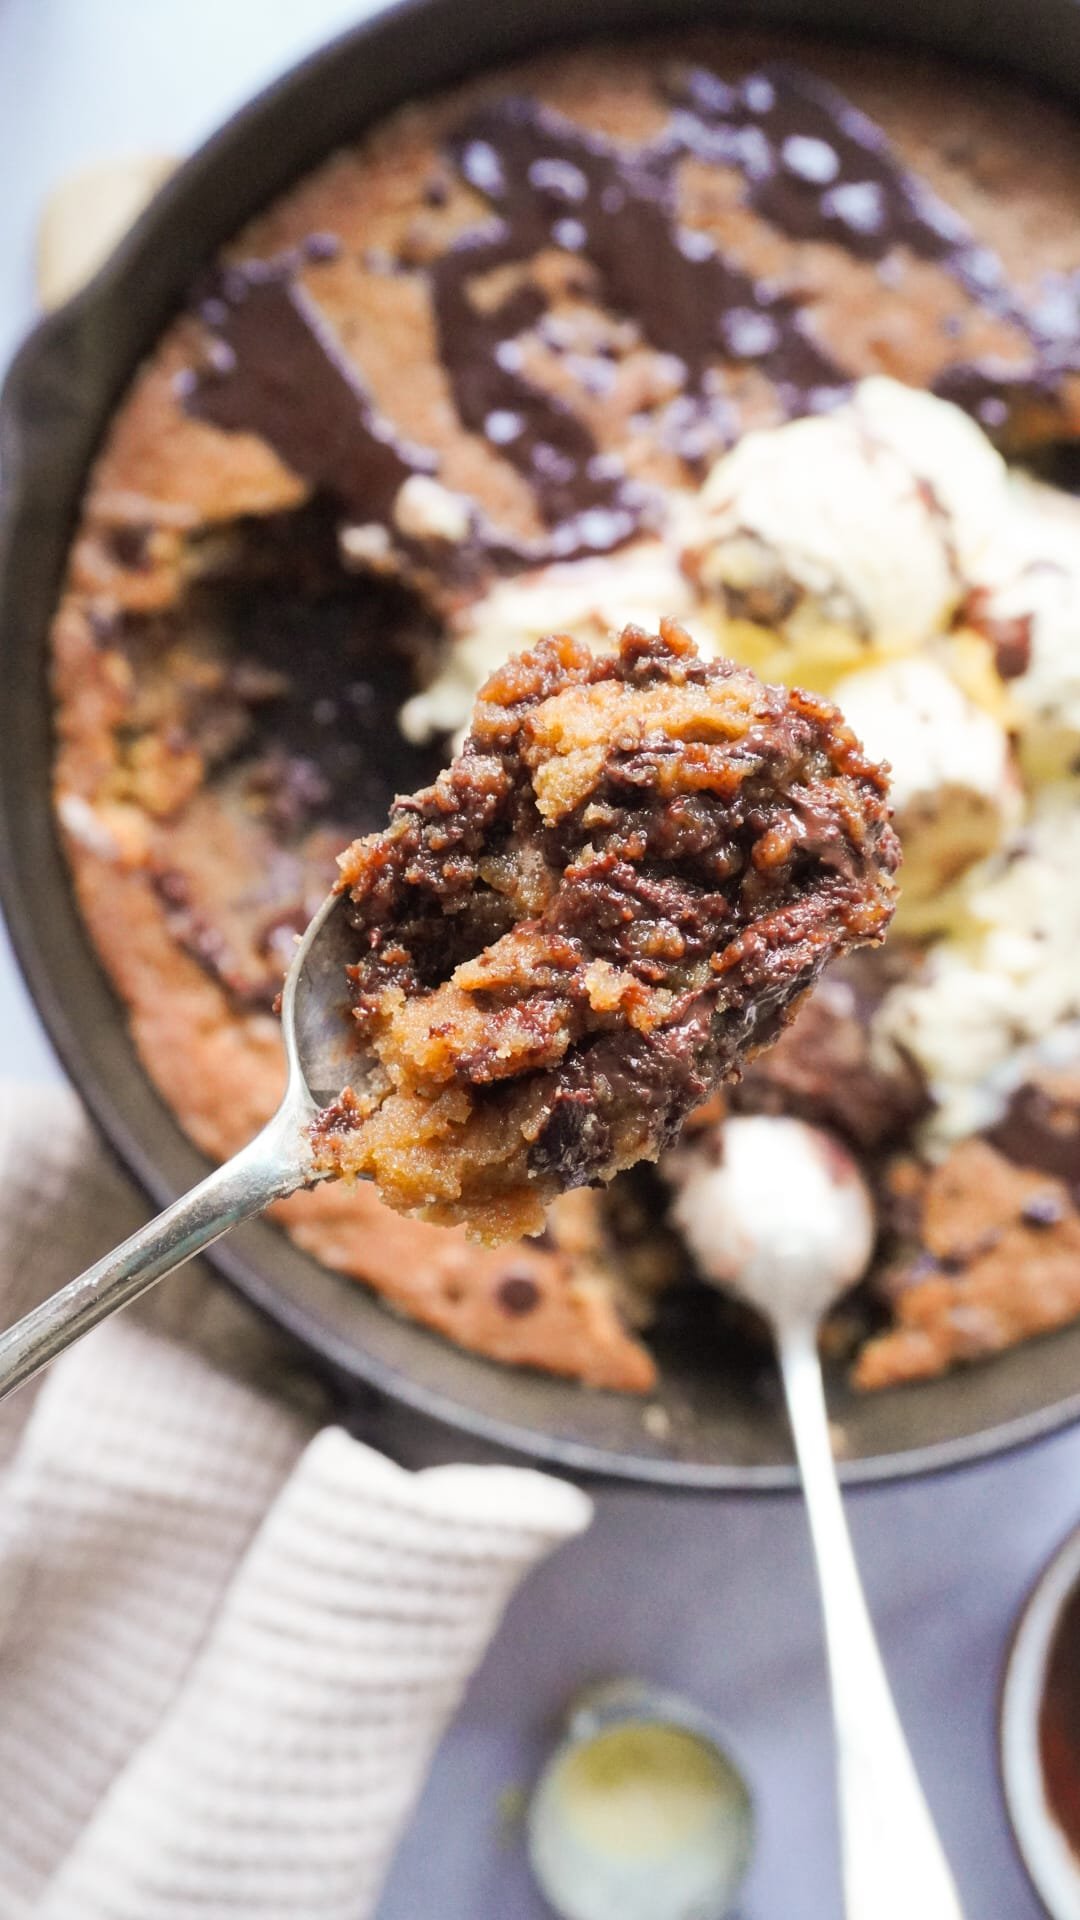 Cookie Dough with chocolate drizzled on top served with a ball of ice cream